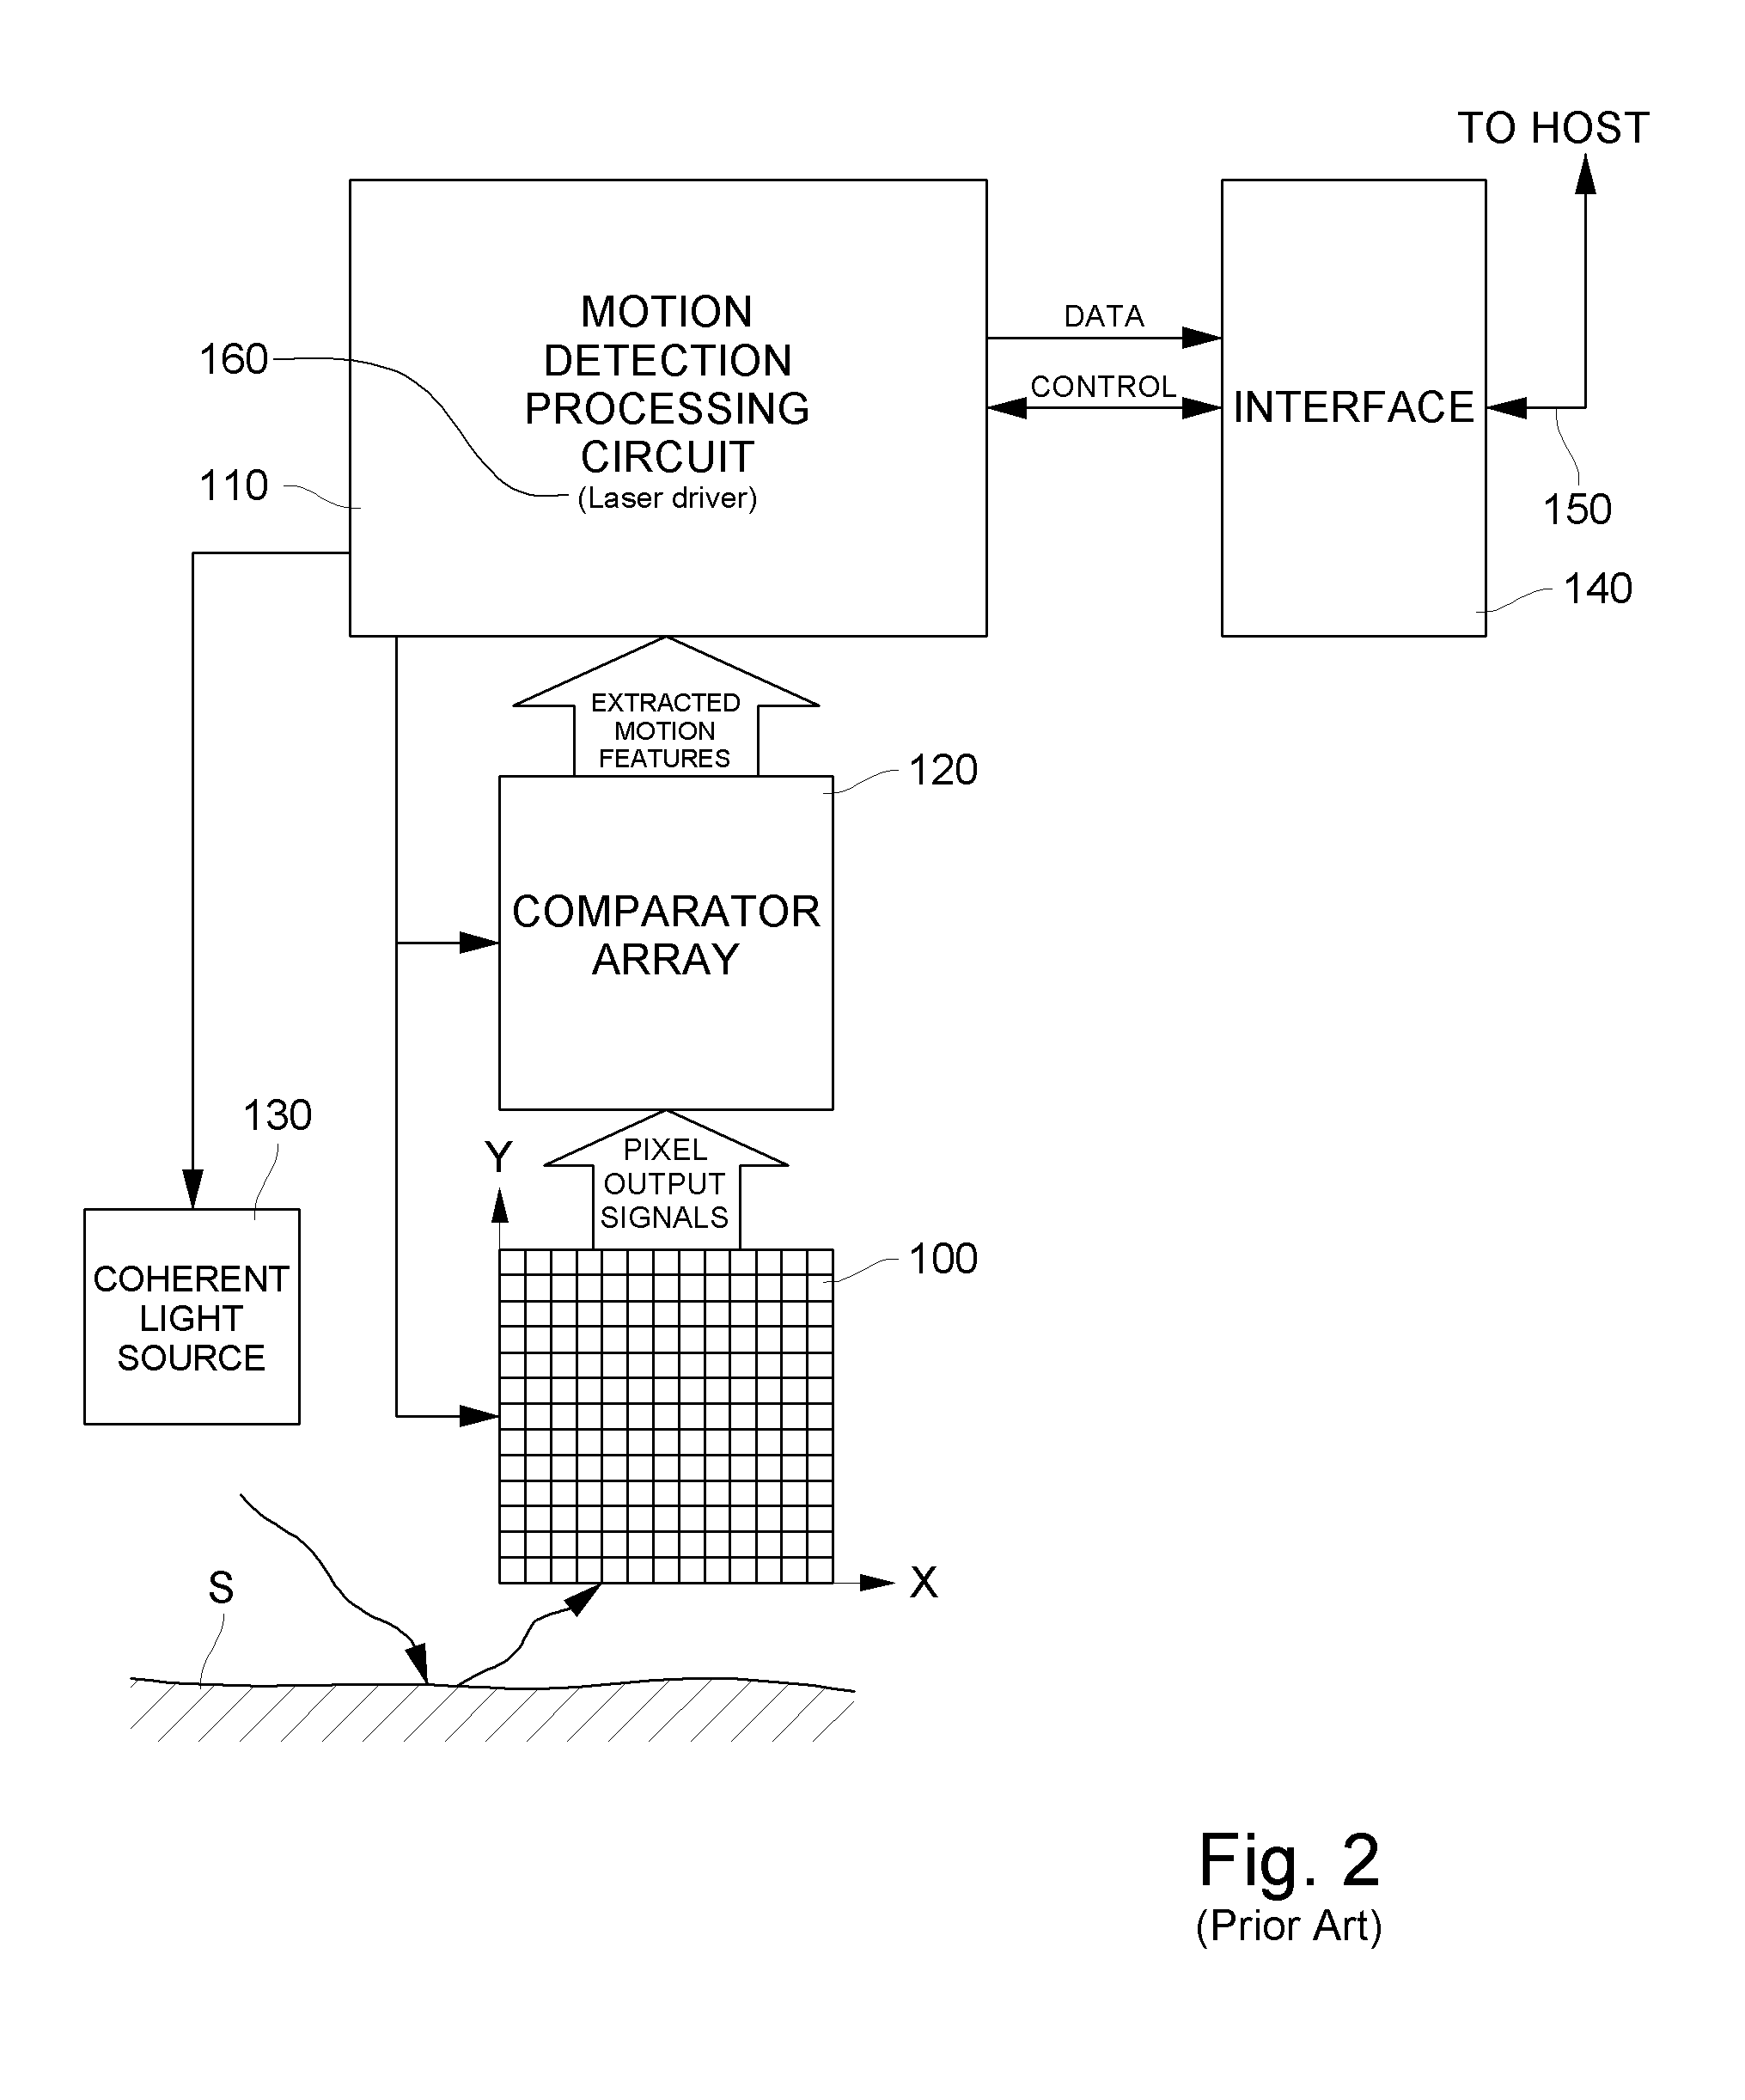 Single-fault laser driver control for optical mouse